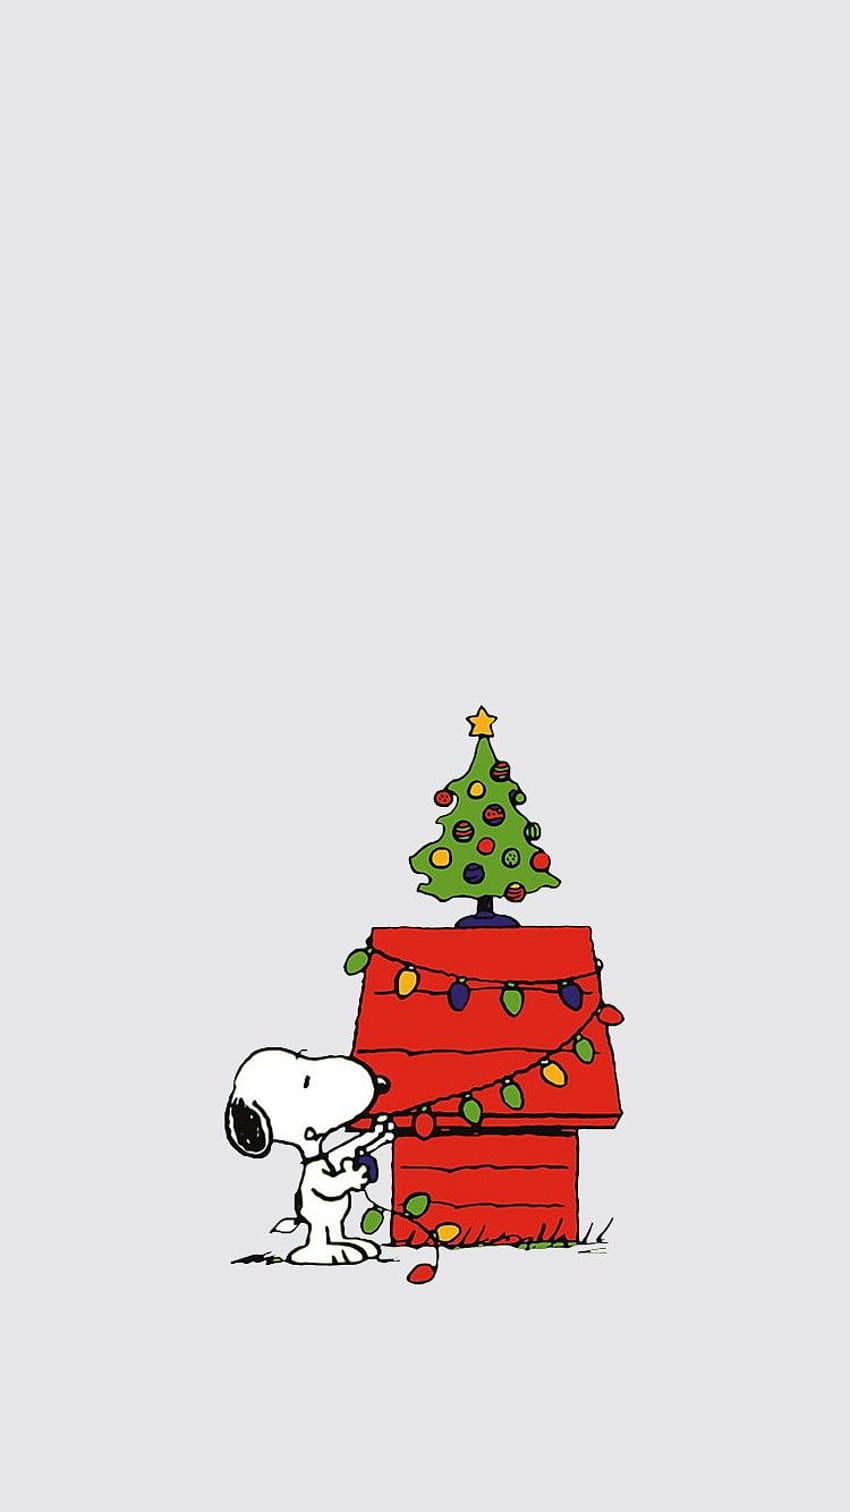 Festive and Free Holiday and Winter Phone Wallpapers